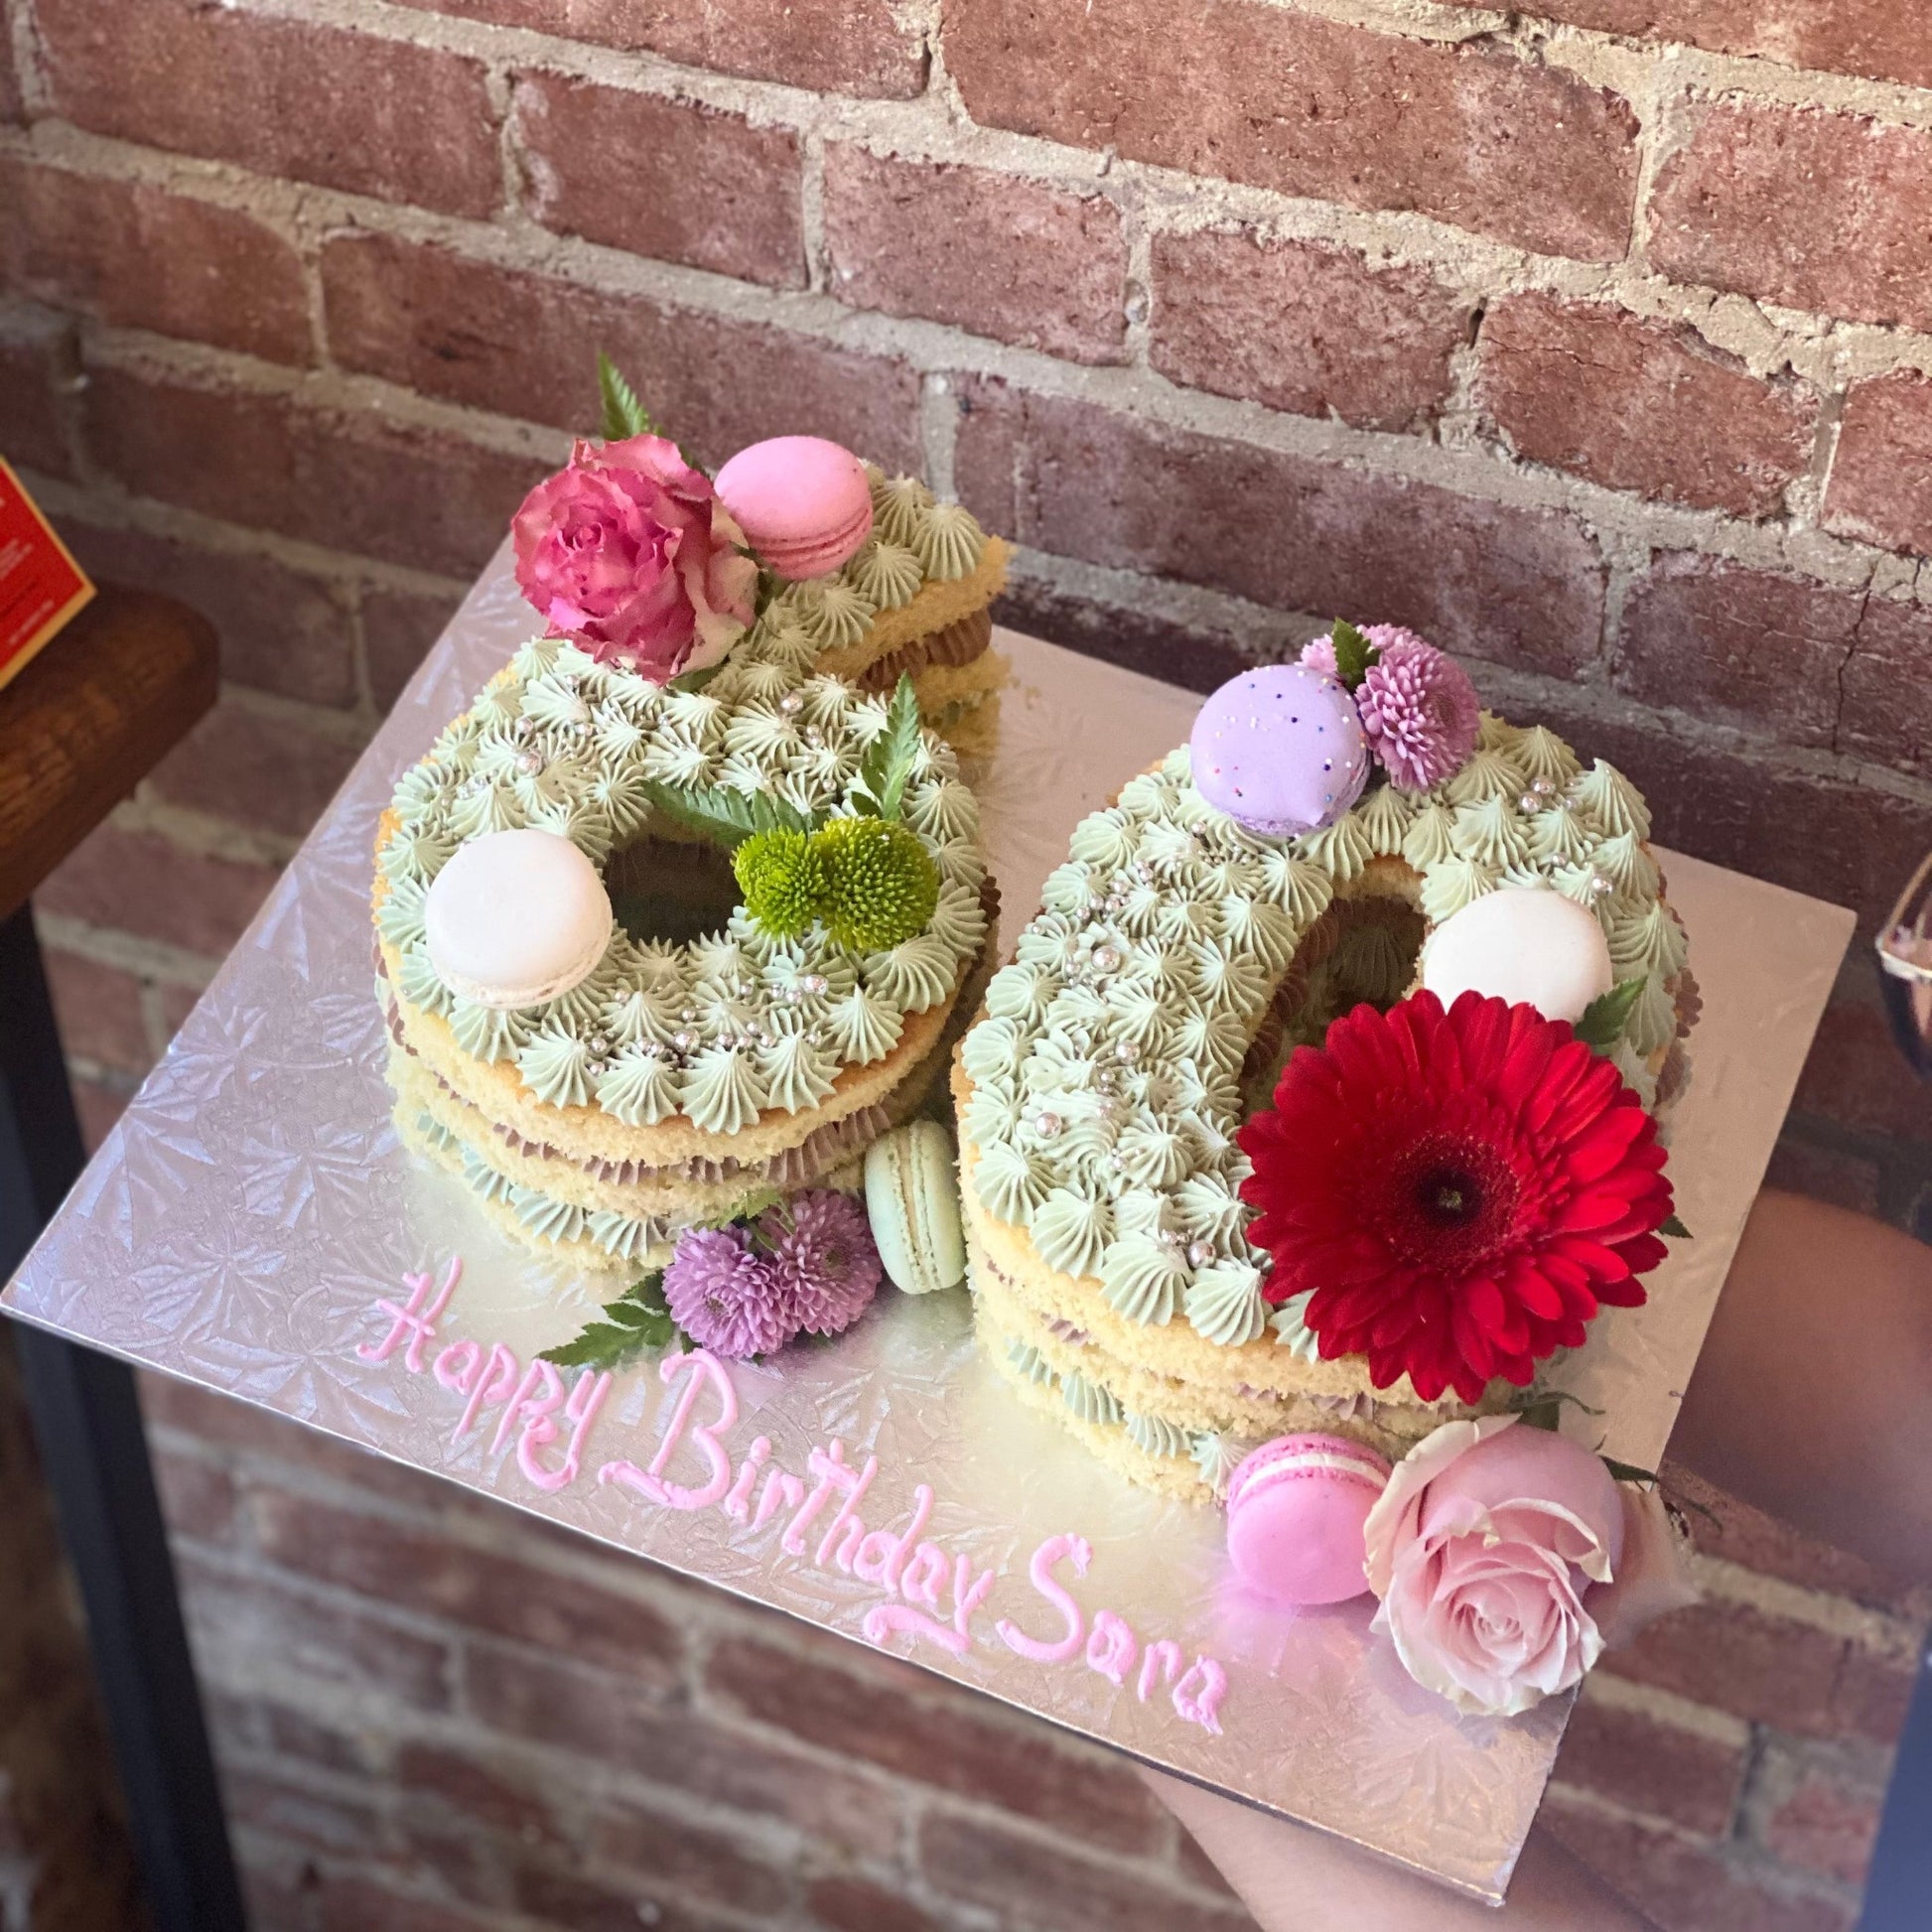 Cakes shaped as the number 60 with macarons and fresh flowers